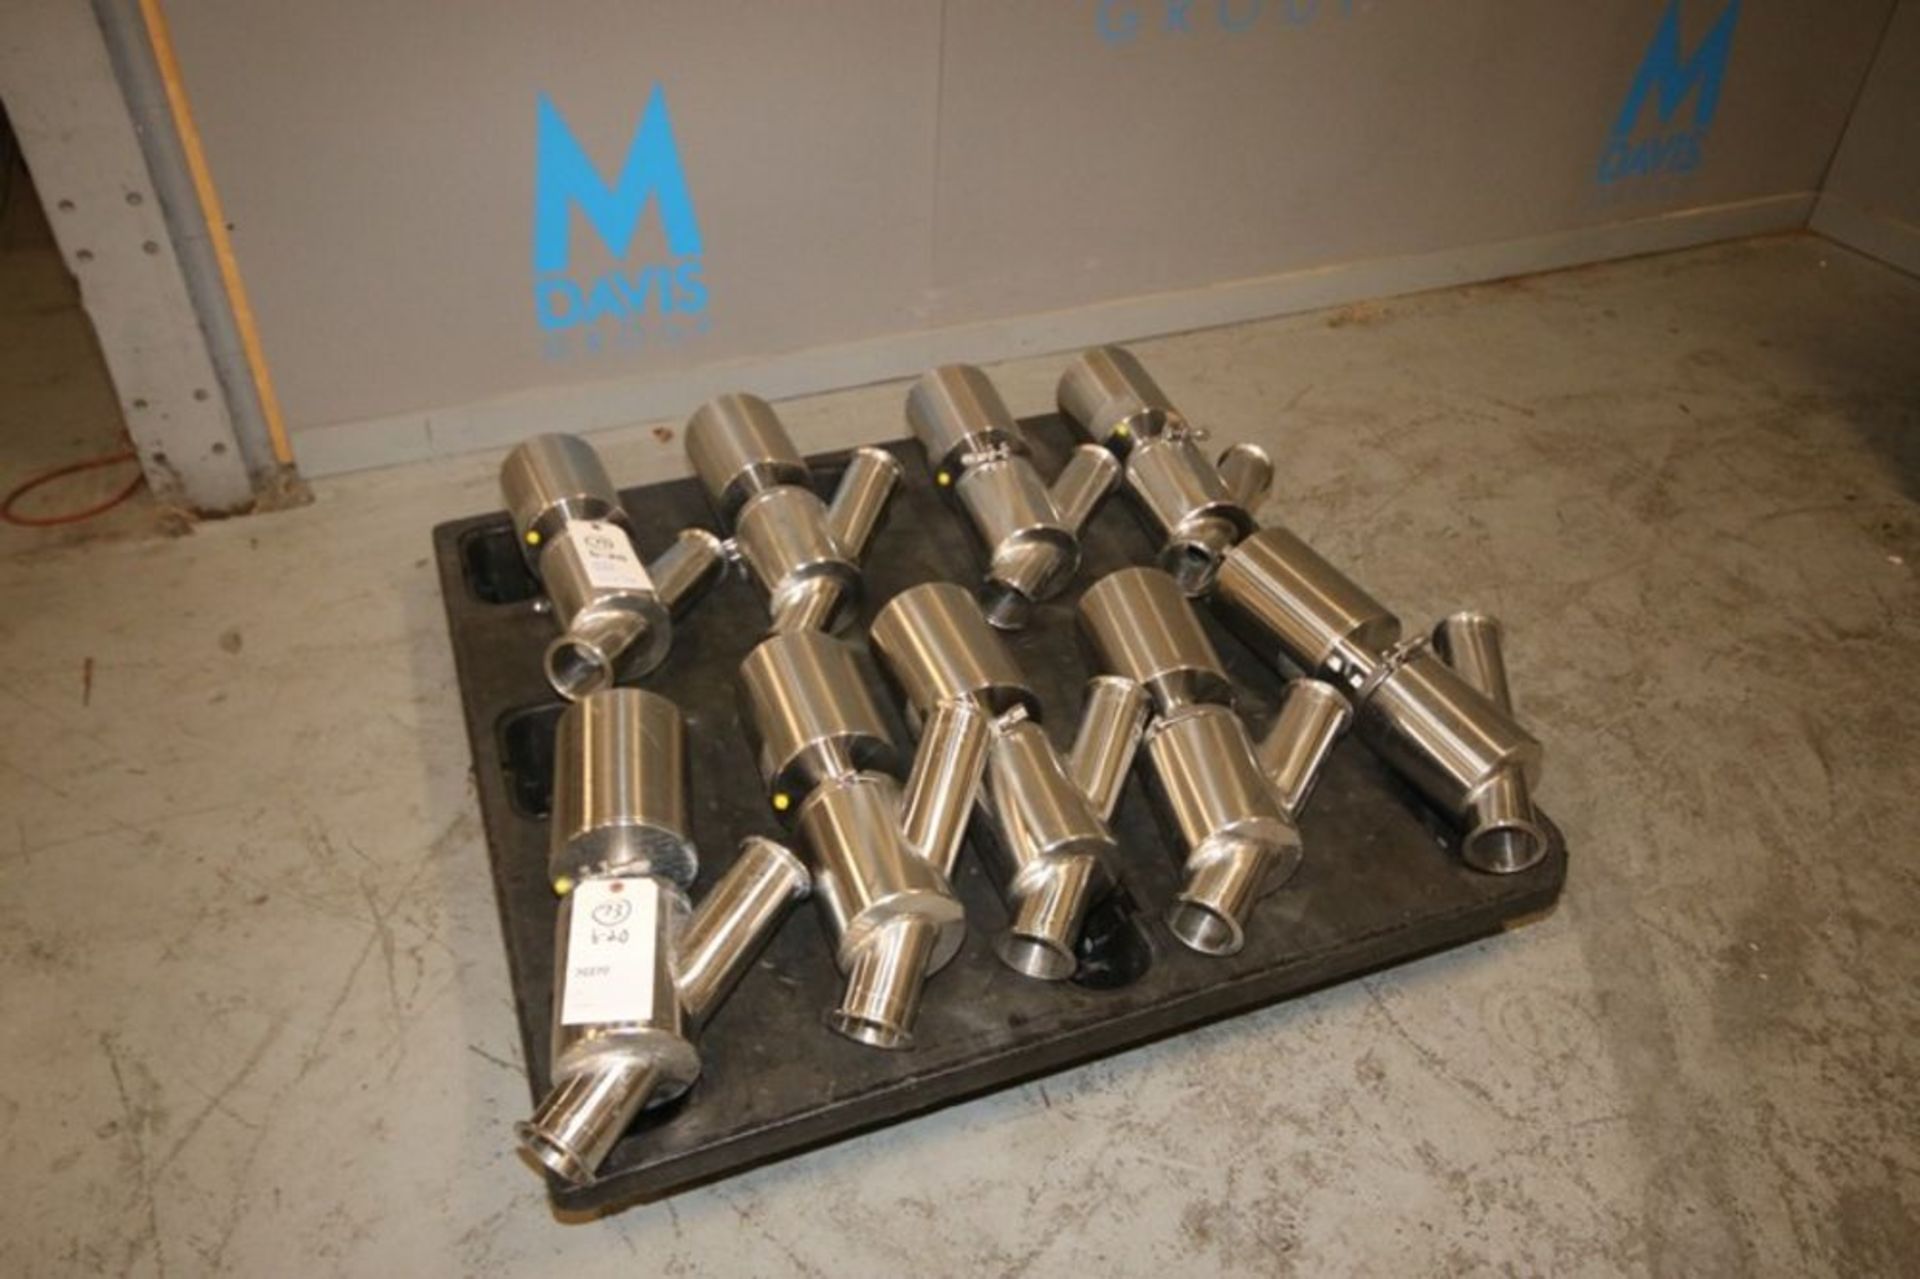 Pentair Sudmo S/S 3" Air Valves, Order No.; 687354 (INV#70270) (Located at the MDG Auction Showroom)